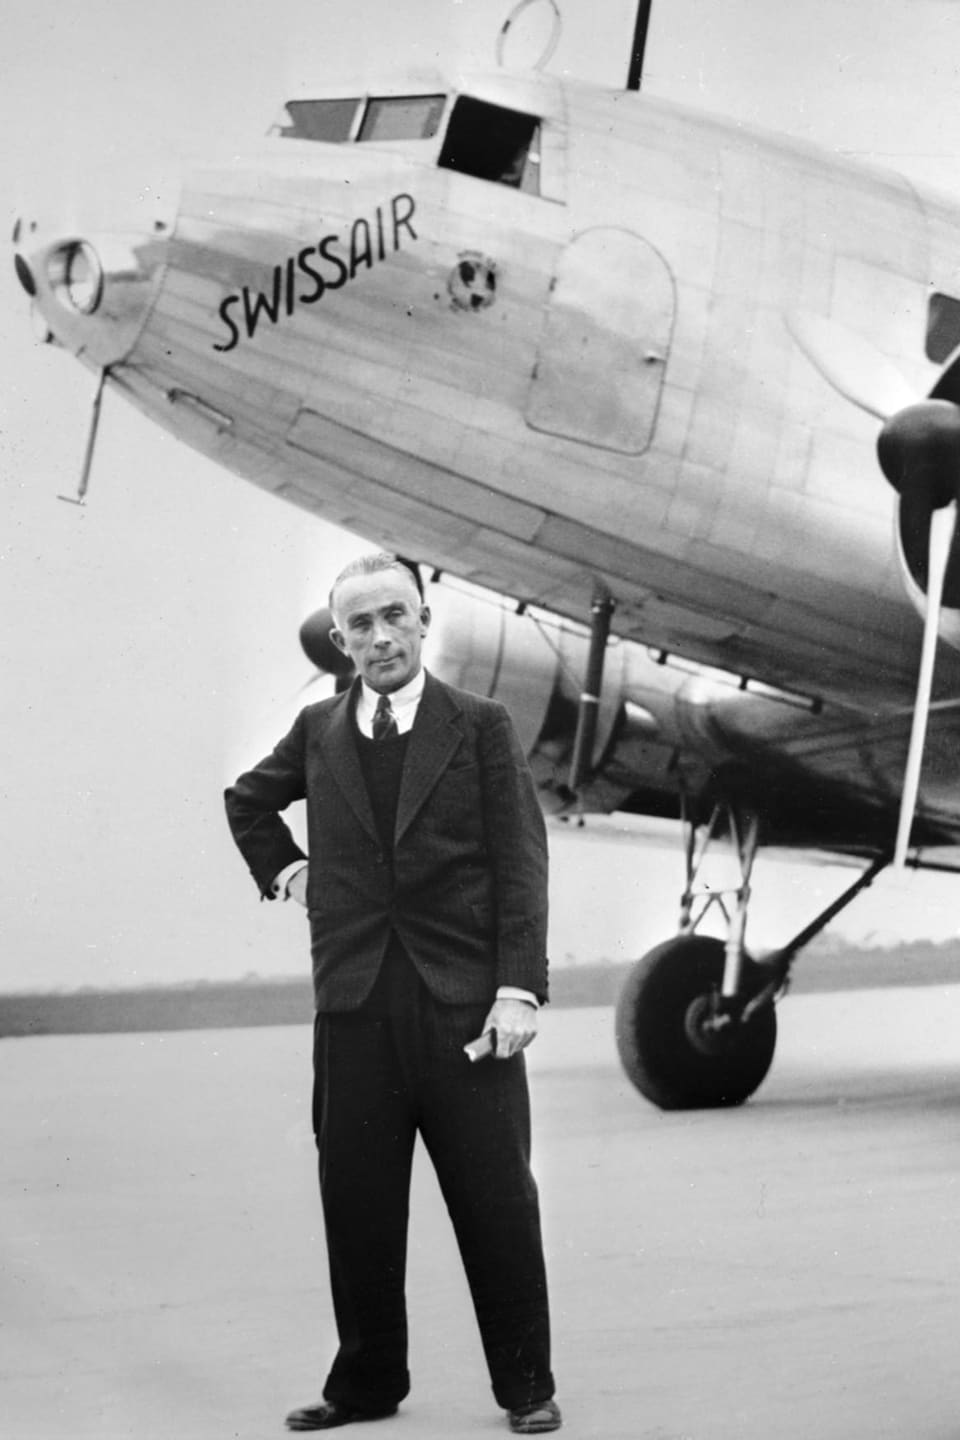 Aviation pioneer Walter Mittelholzer in front of the first Swissair DC-3 aircraft in an undated photo.